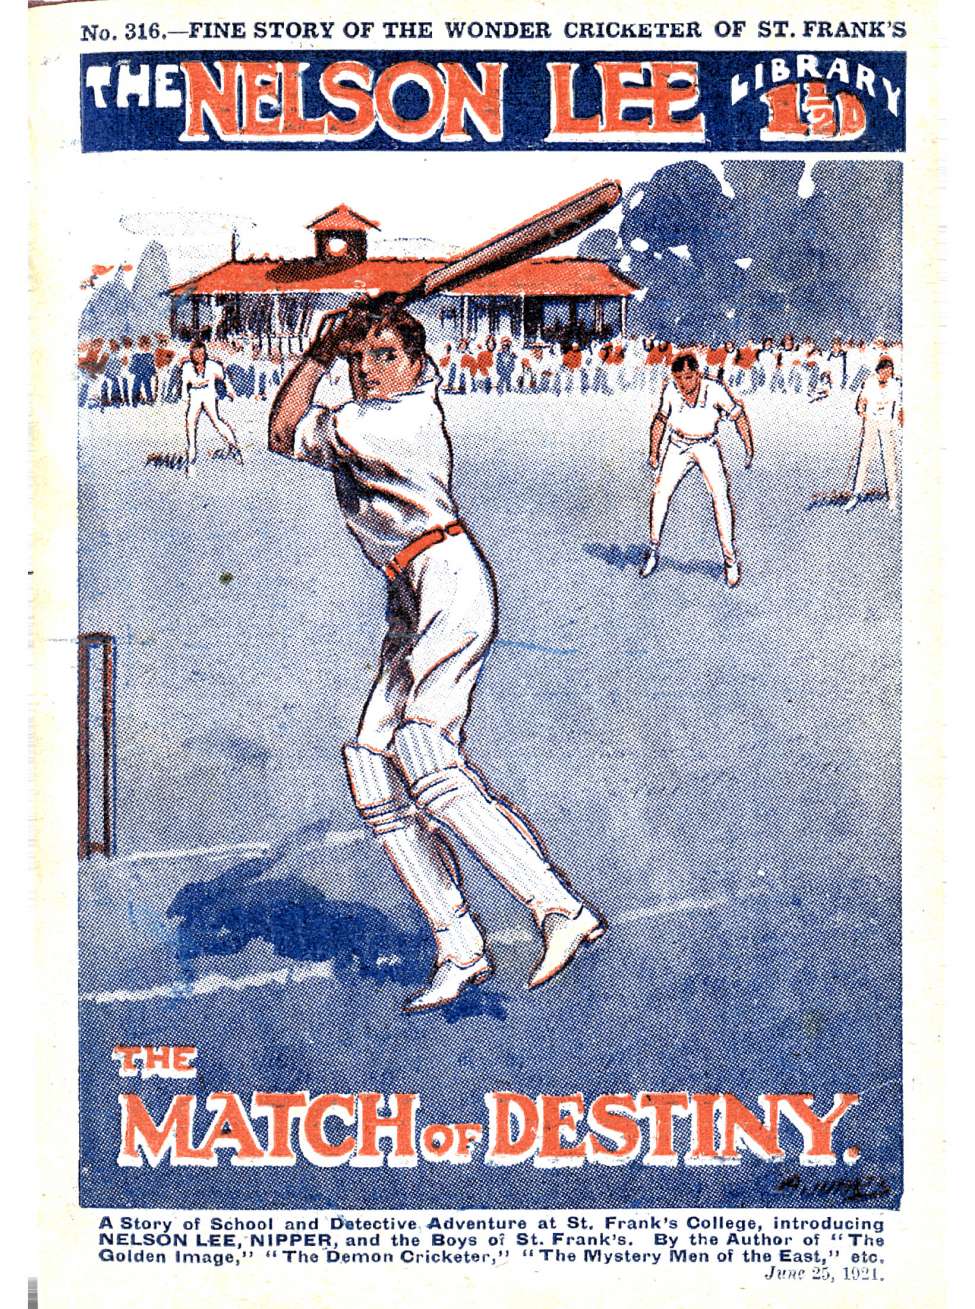 Comic Book Cover For Nelson Lee Library s1 316 - The Match of Destiny